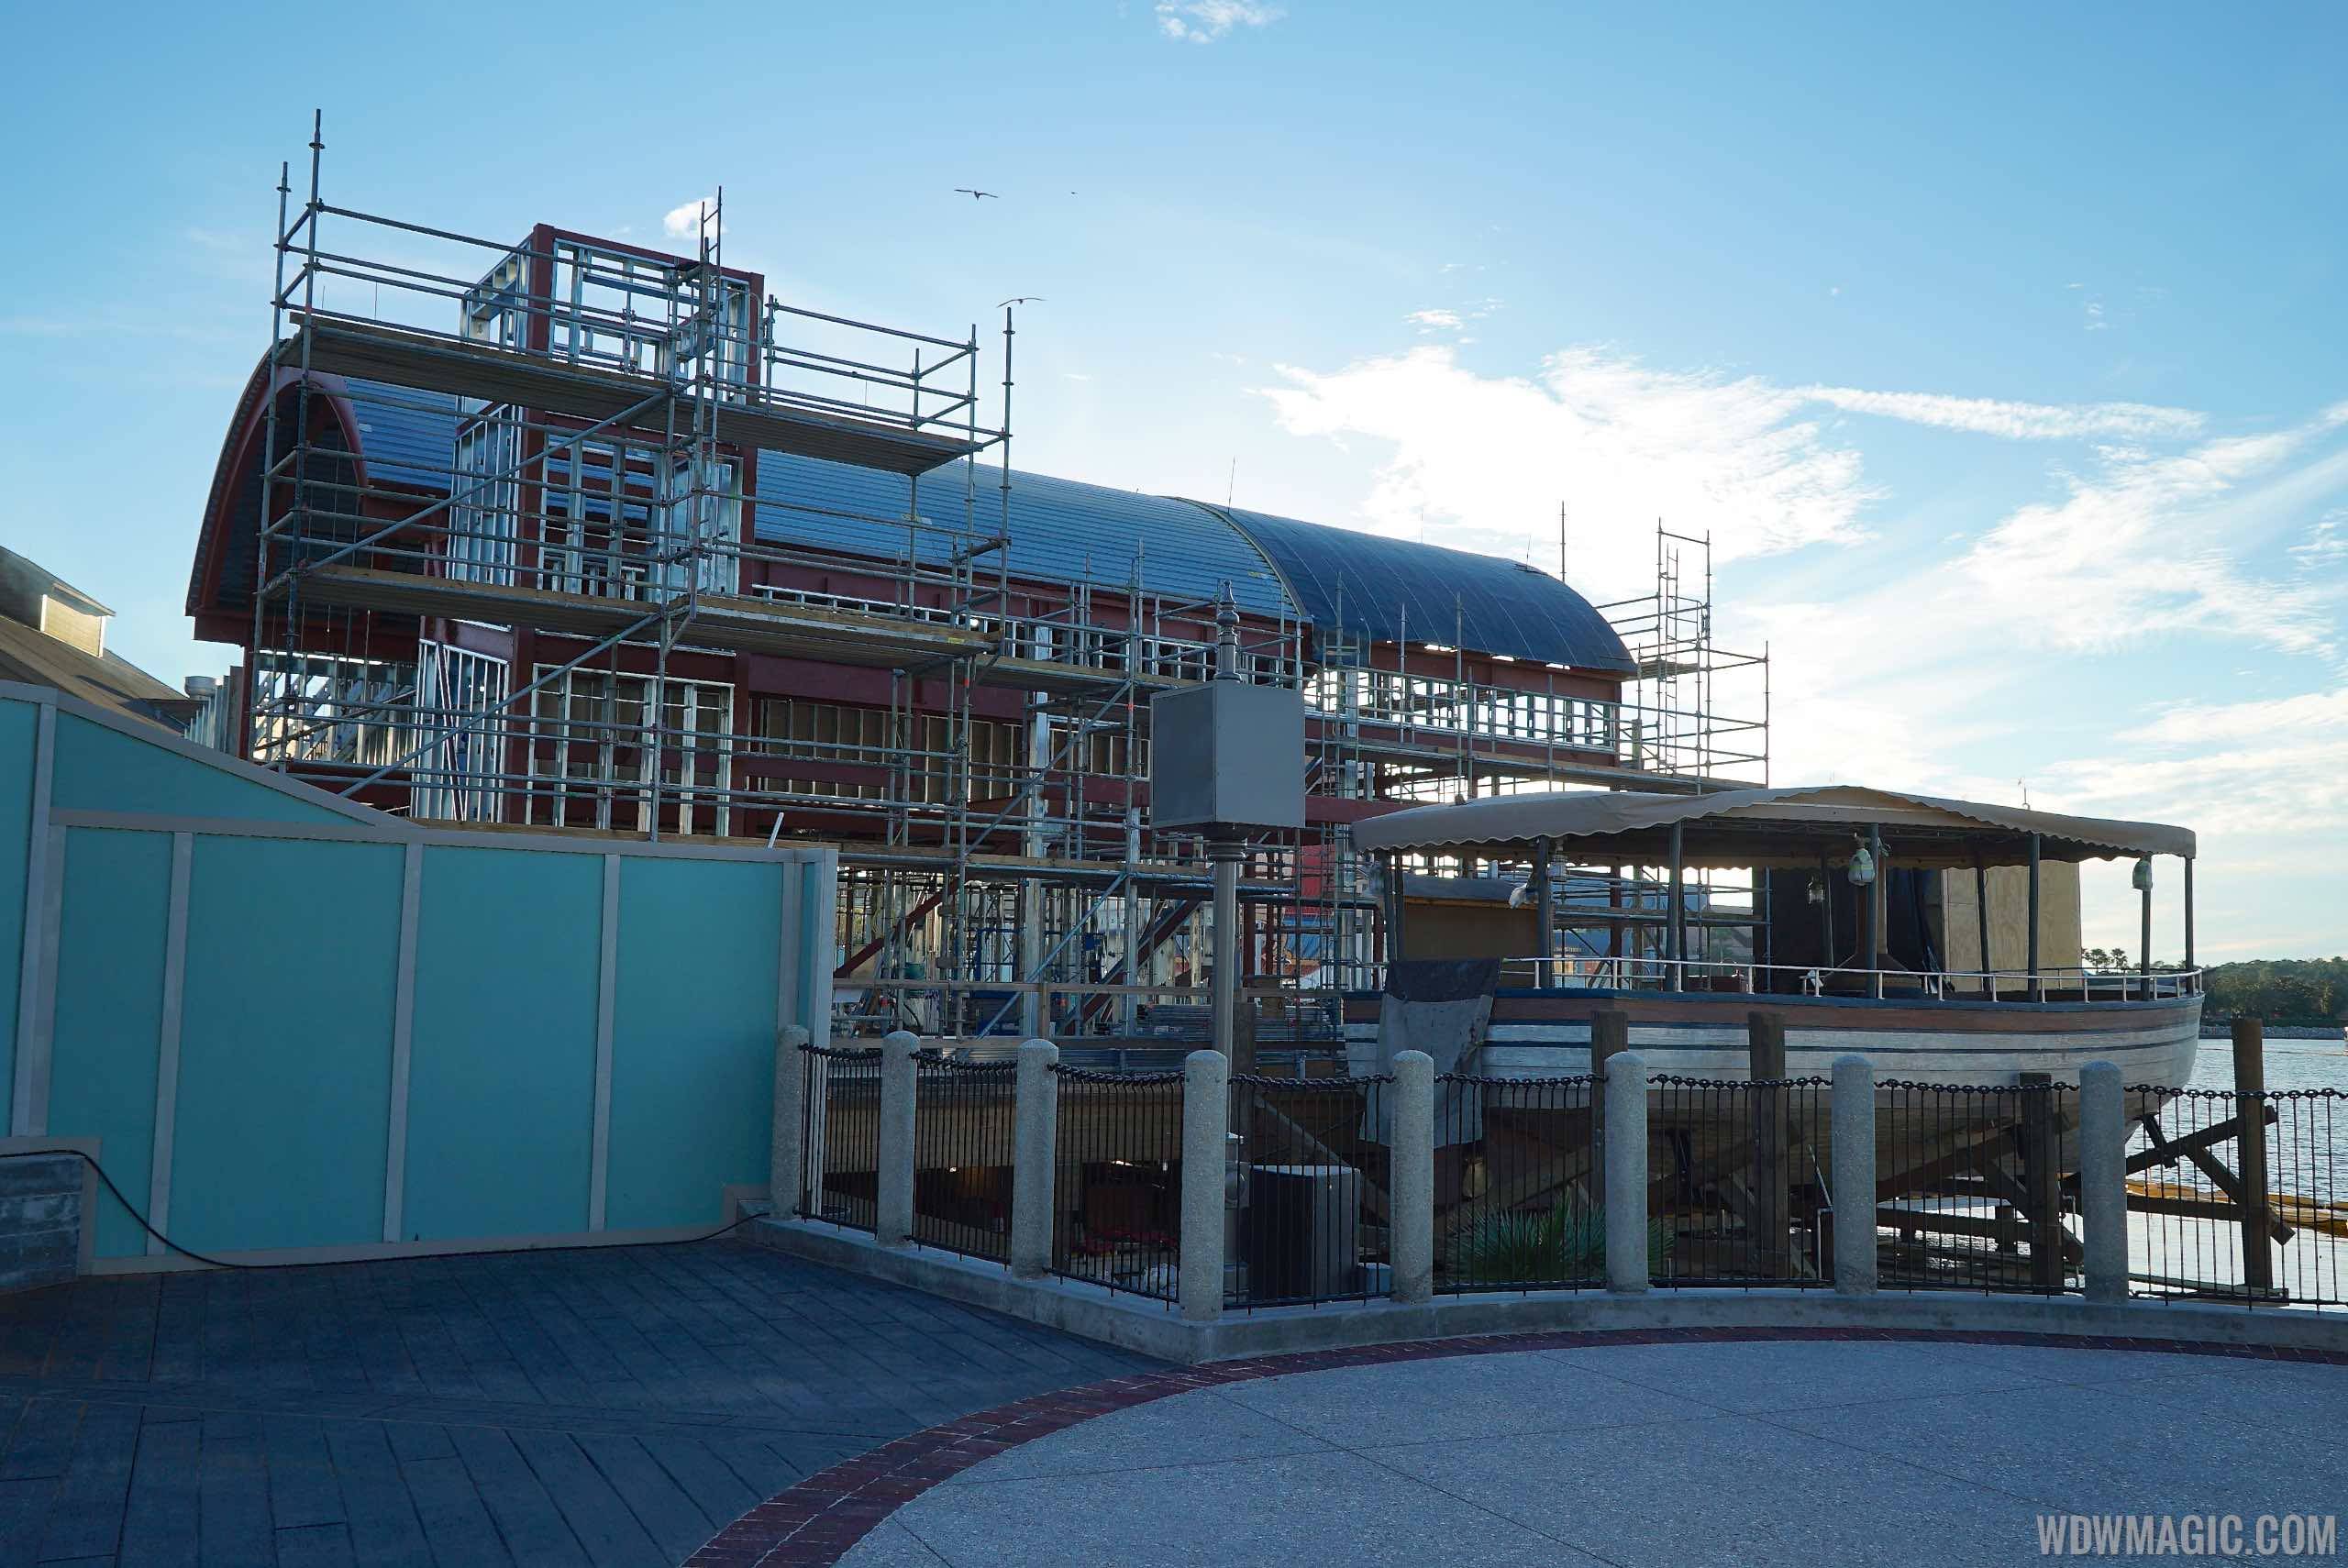 PHOTOS - Boat arrives at The Hangar to form part of the outdoor patio area for the Disney Springs bar